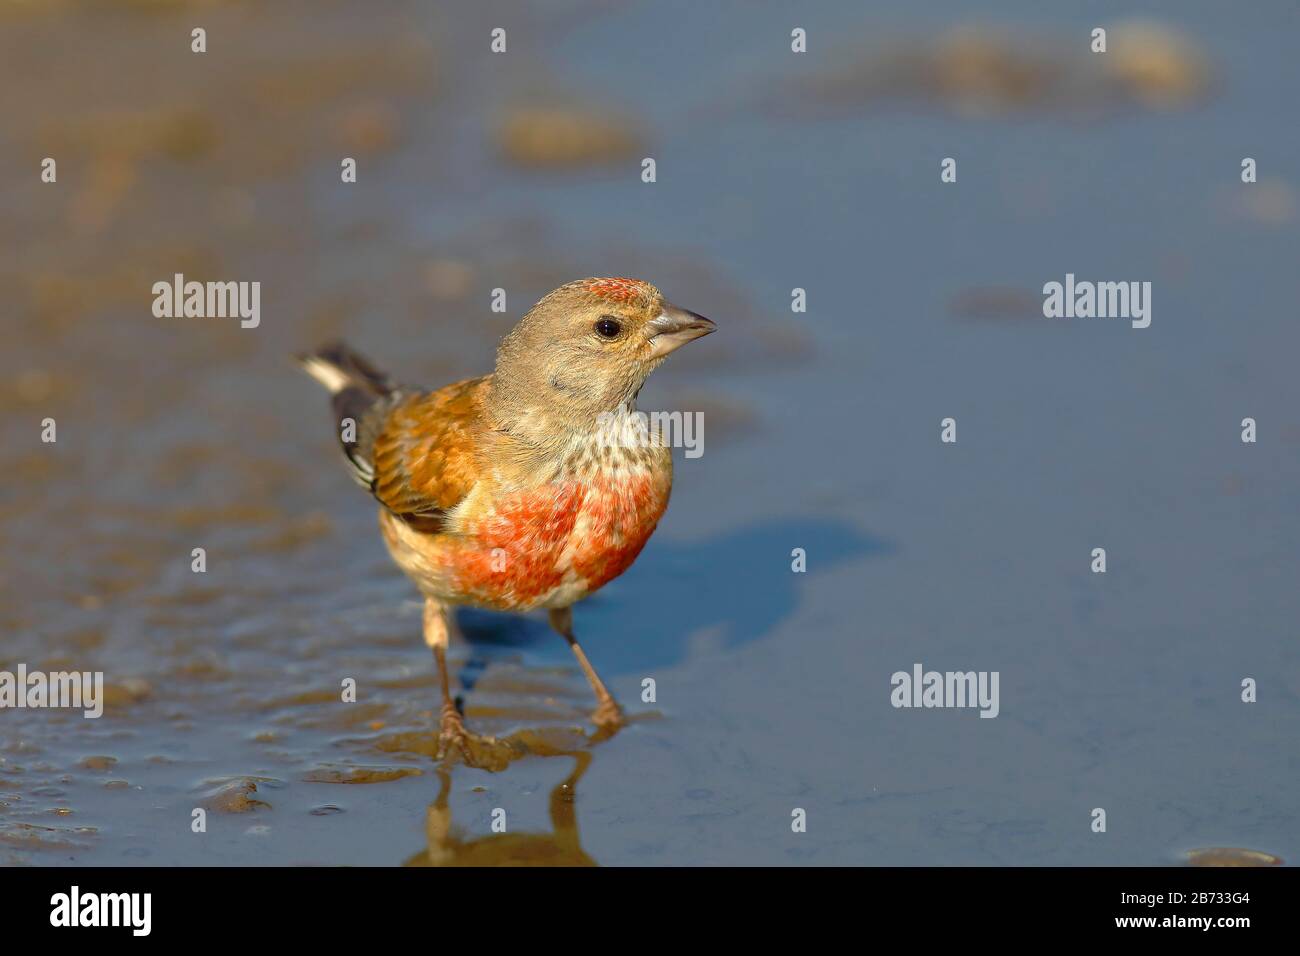 Linnet (Linaria cannabina), male, standing in water puddle, National Park Lake Neusiedl, Burgenland, Austria Stock Photo